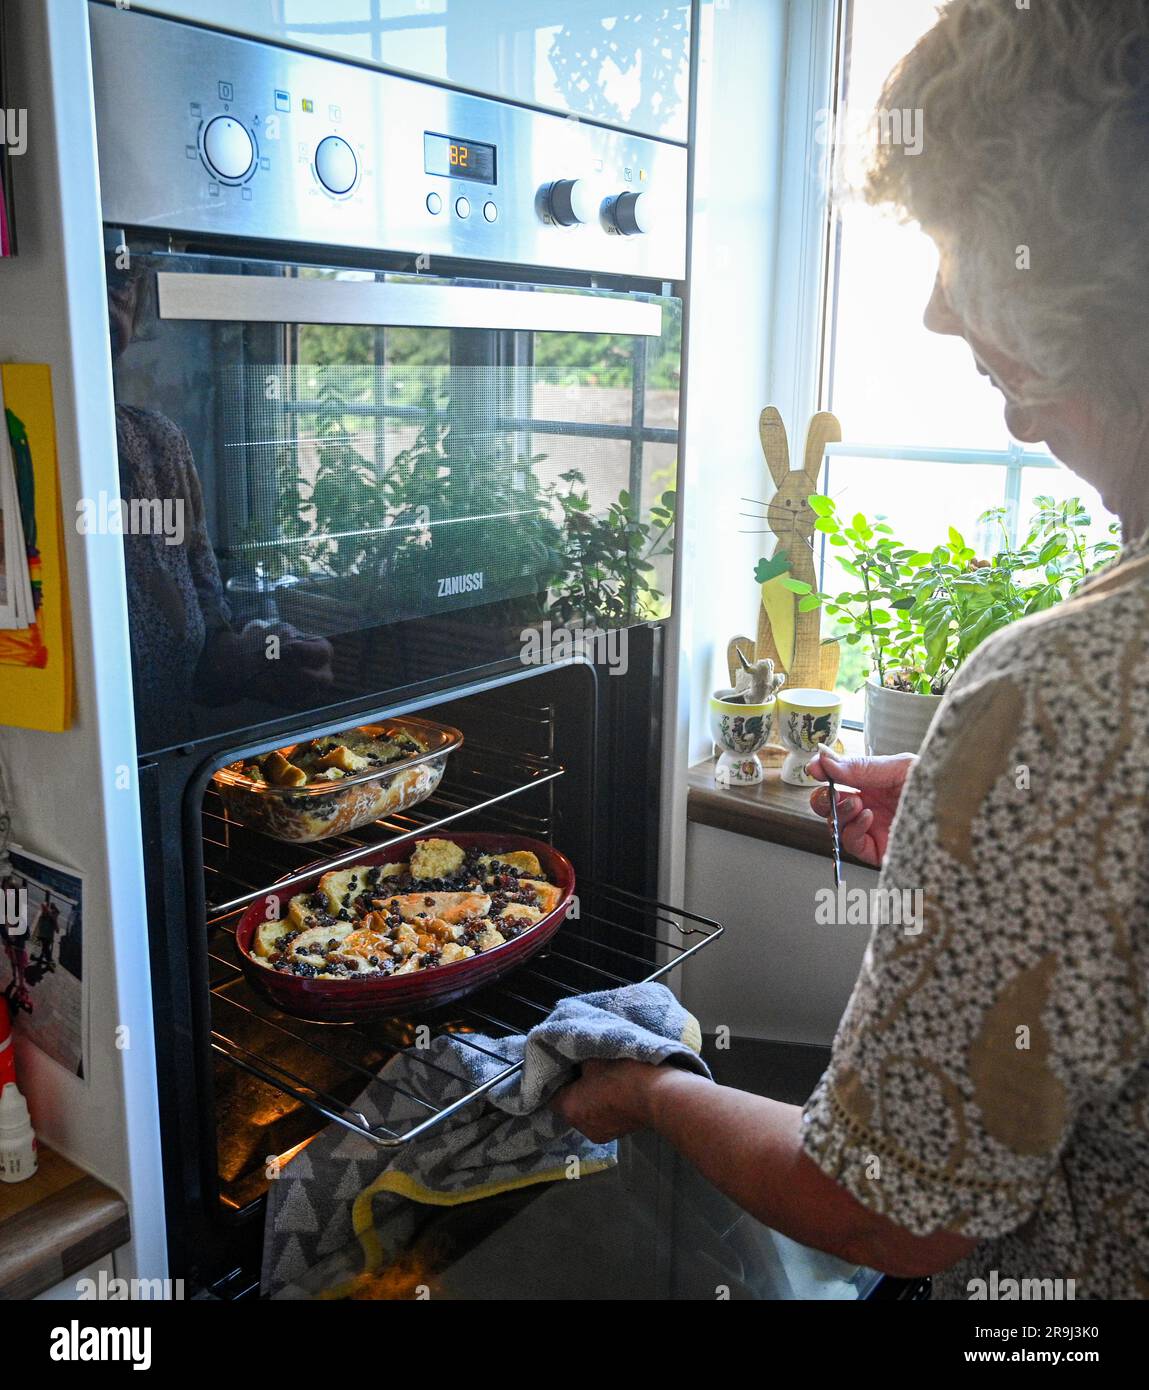 https://c8.alamy.com/comp/2R9J3K0/home-made-bread-and-butter-pudding-being-cooked-in-an-electric-fan-oven-in-the-kitchen-2R9J3K0.jpg